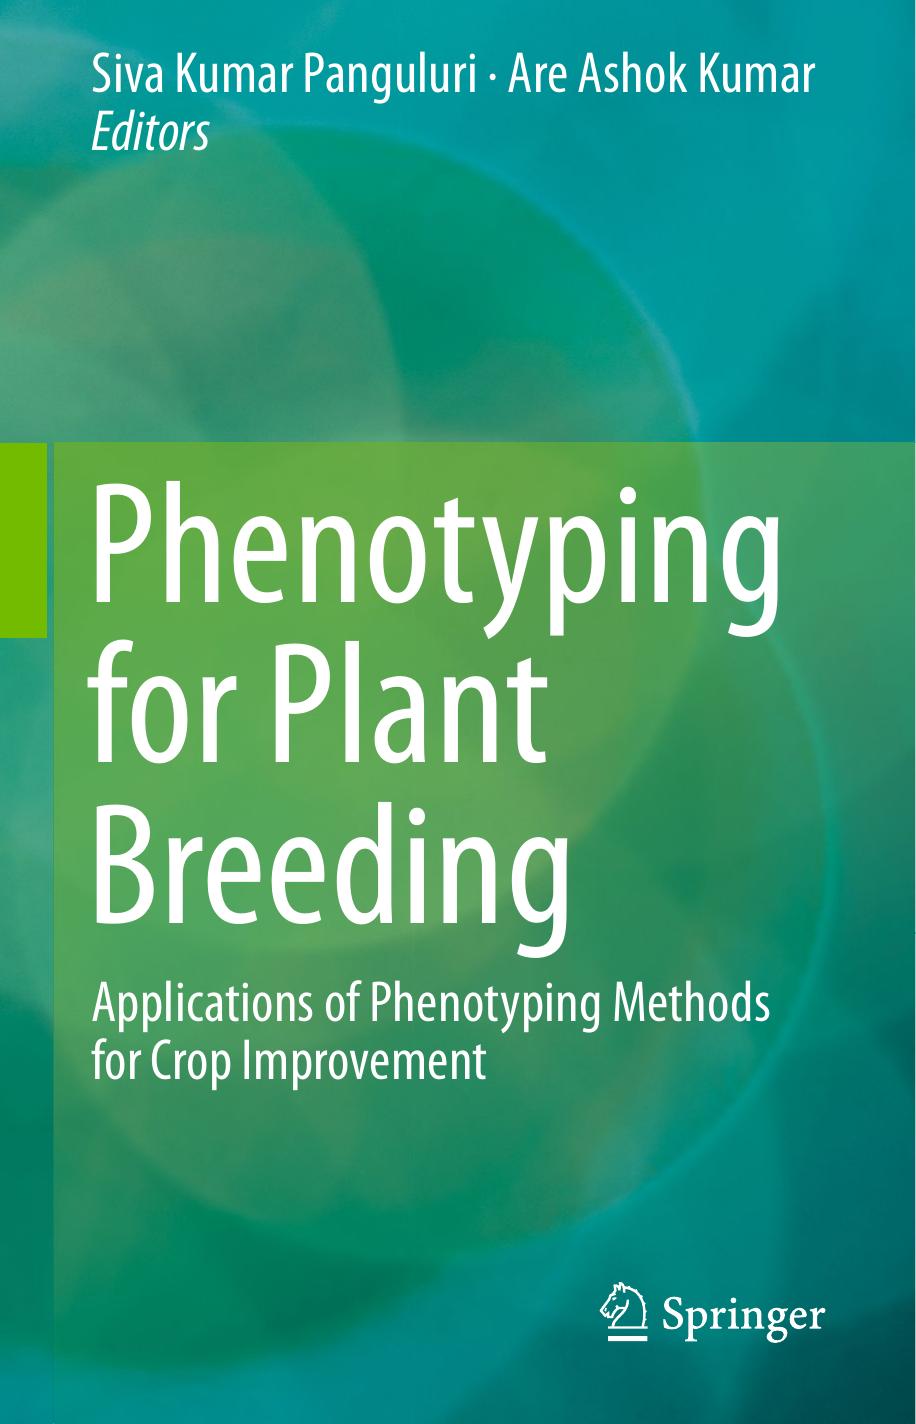 Phenotyping for Plant Breeding  Applications of Phenotyping Methods for Crop Improvement ( PDFDrive ), 2013